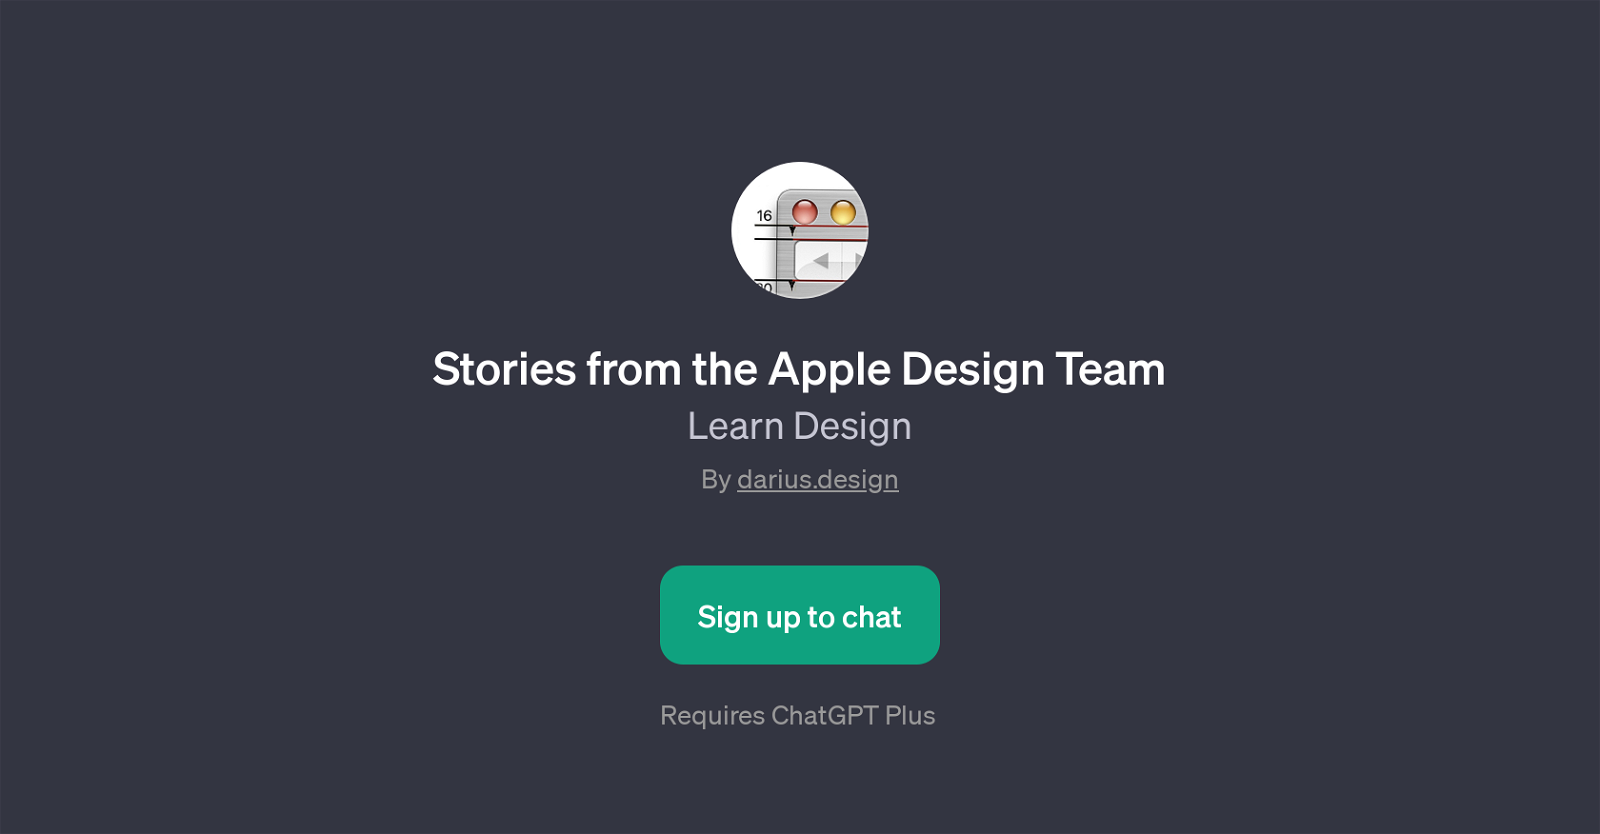 Stories from the Apple Design Team website